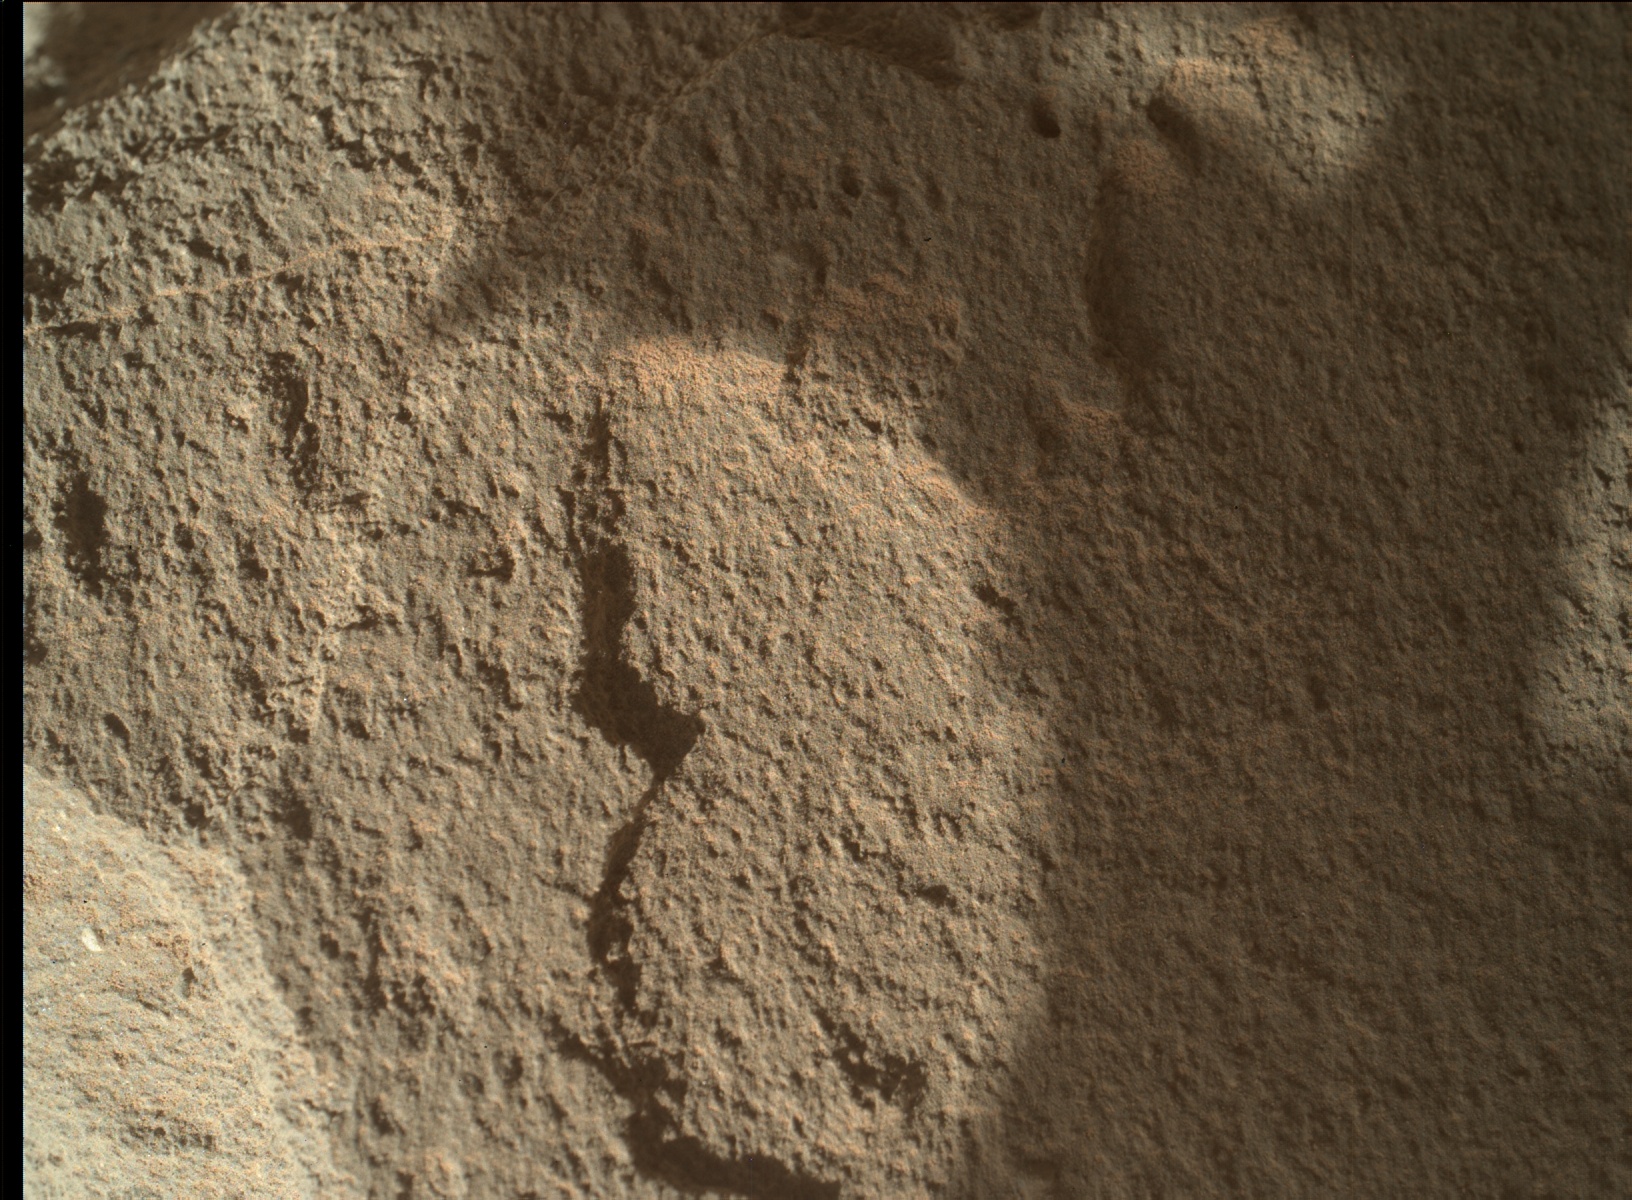 Nasa's Mars rover Curiosity acquired this image using its Mars Hand Lens Imager (MAHLI) on Sol 1313